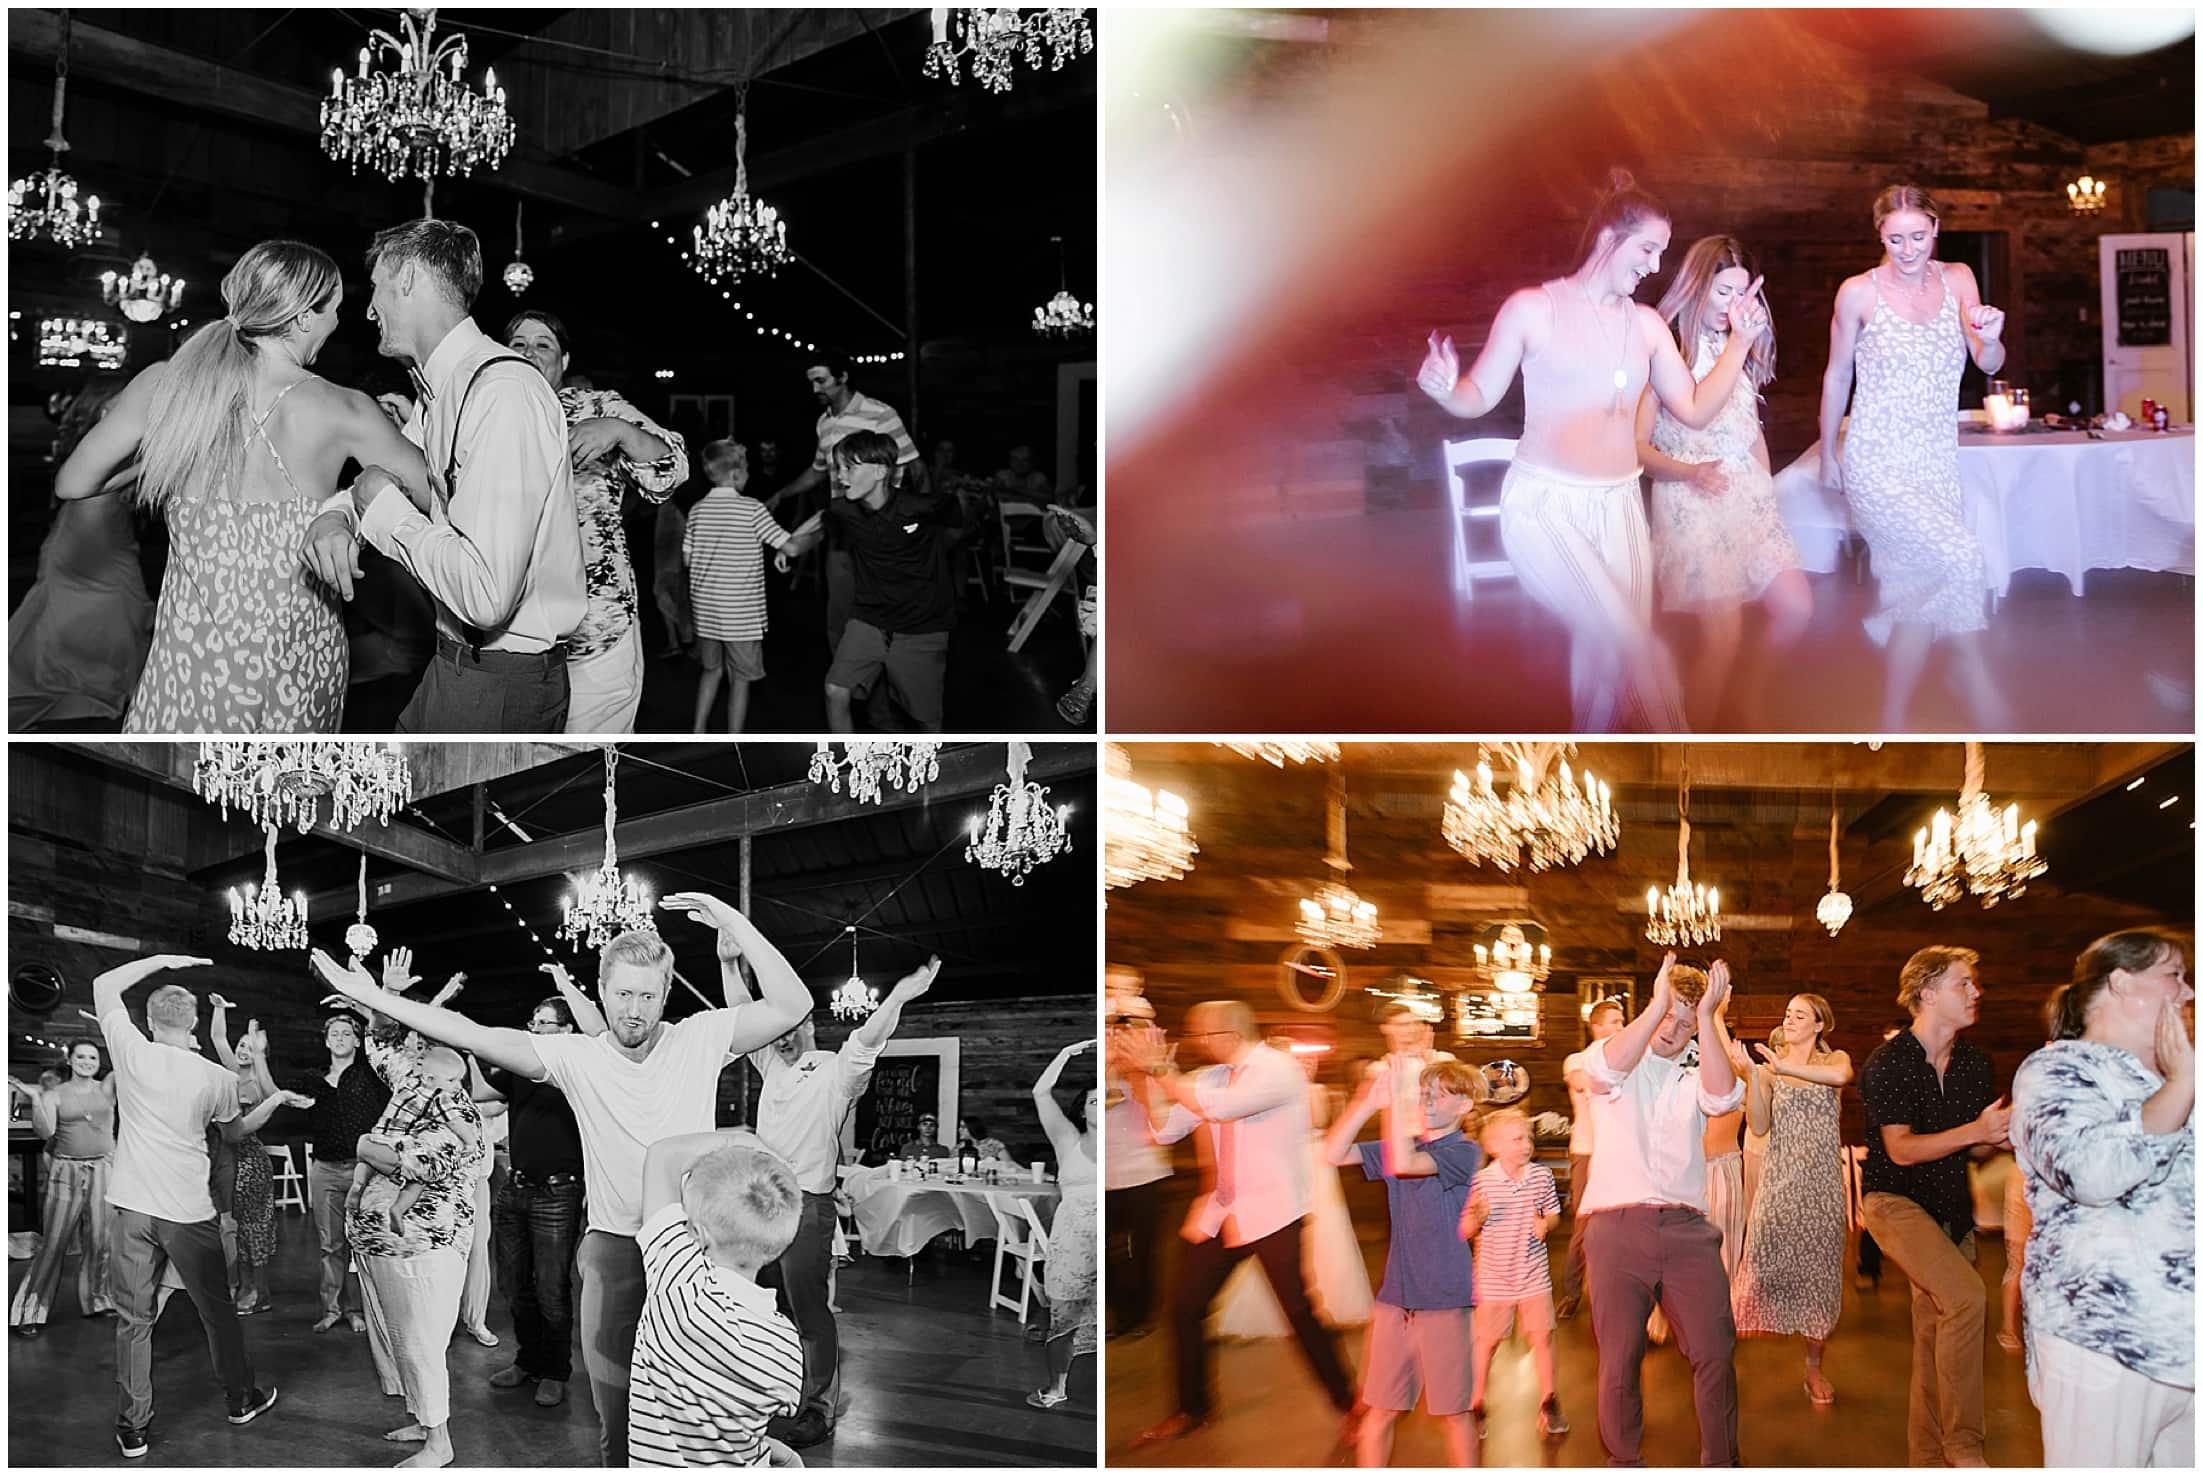 guests dancing to music at wedding, Brit Nicole Photography, West Texas Barn Wedding, West Texas Small Wedding, West Texas wedding venue, DJ Platinum, Vera Wang engagement ring, Zales Manly Bands wedding ring, David's Bridal wedding dress, Krazy Cakes brides wedding cake, wedding cupcake, Betsey Johnson wedding high heels, Joy's Downtown Flowers wedding decor, Sparrow Creek Ranch, texas wedding ranch, places to get married in Texas, small intimate wedding, summer wedding, texas sky, bride and groom first look, first look with dad, matching bridesmaids robes, June wedding, junebug weddings, wandering weddings, the knot, best weddings